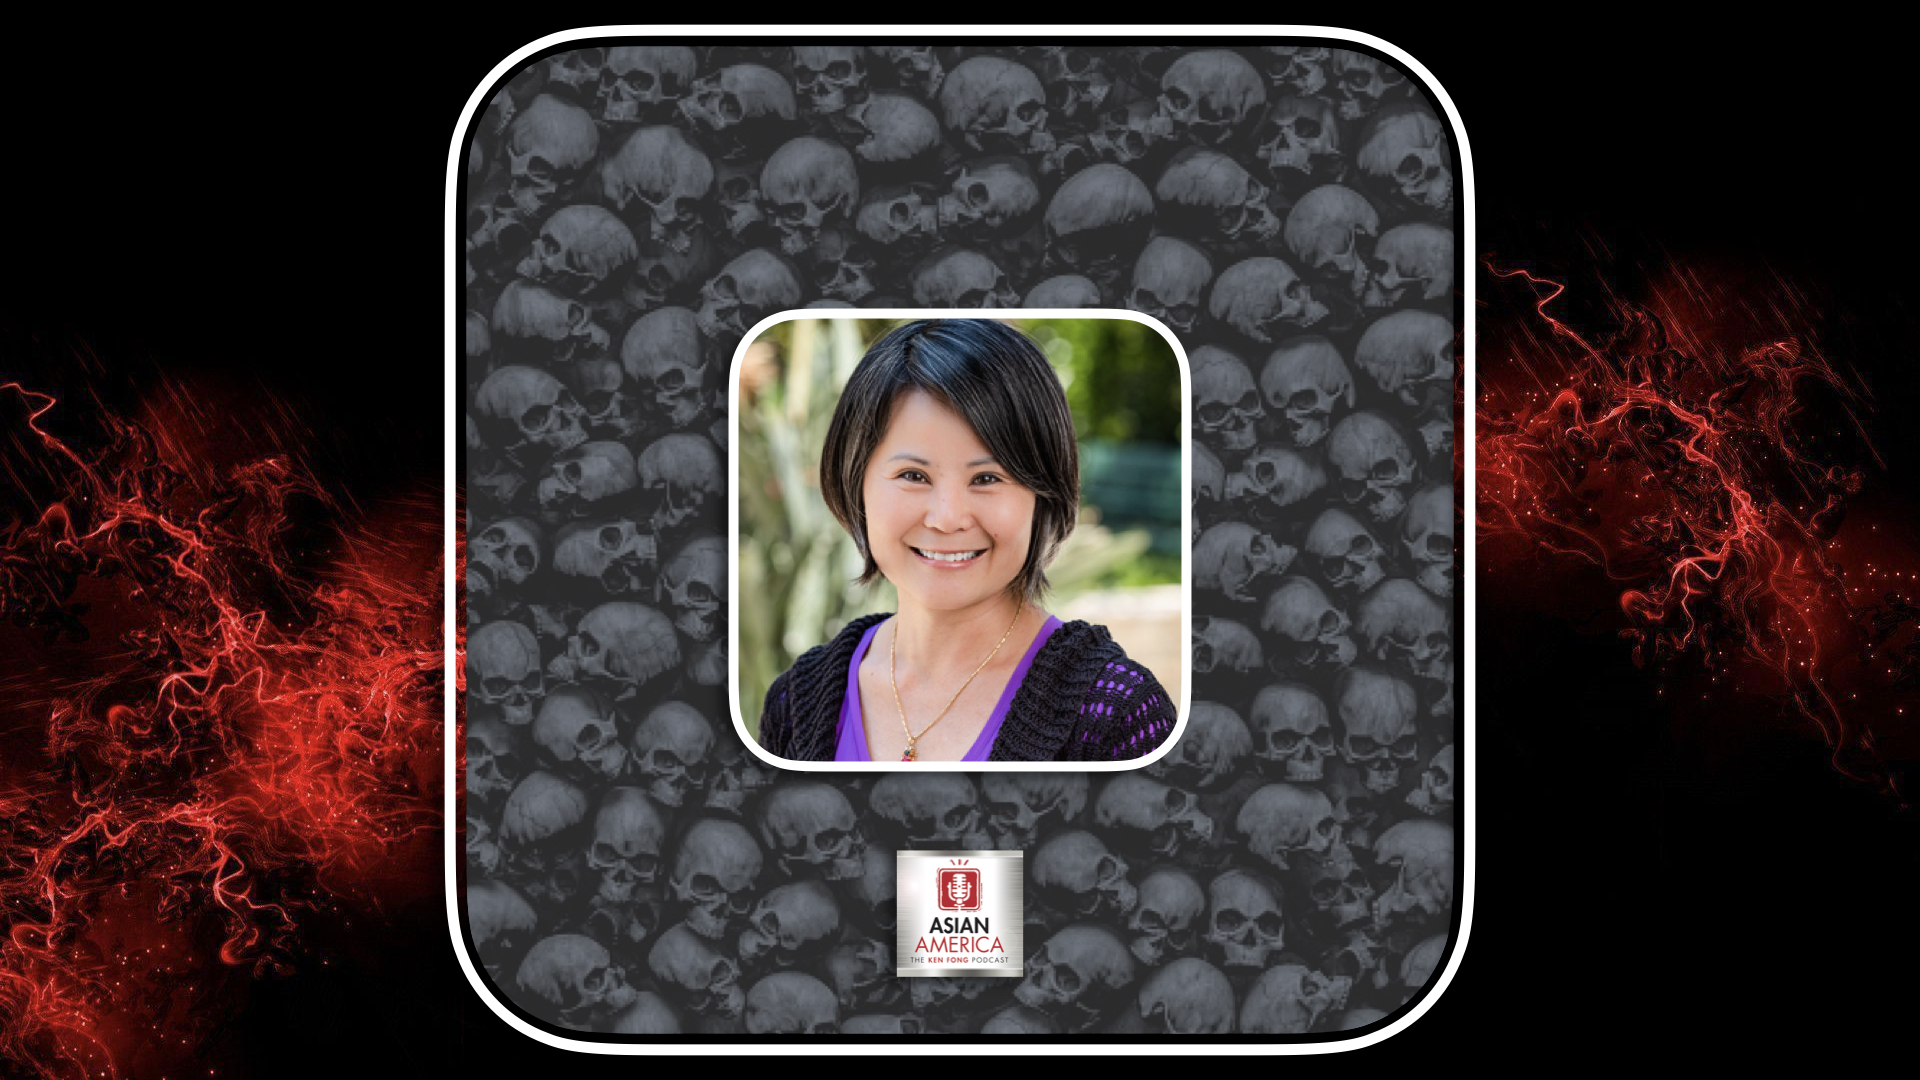 Ep 36: Chheng Ear on Surviving Cambodia’s Killing Fields